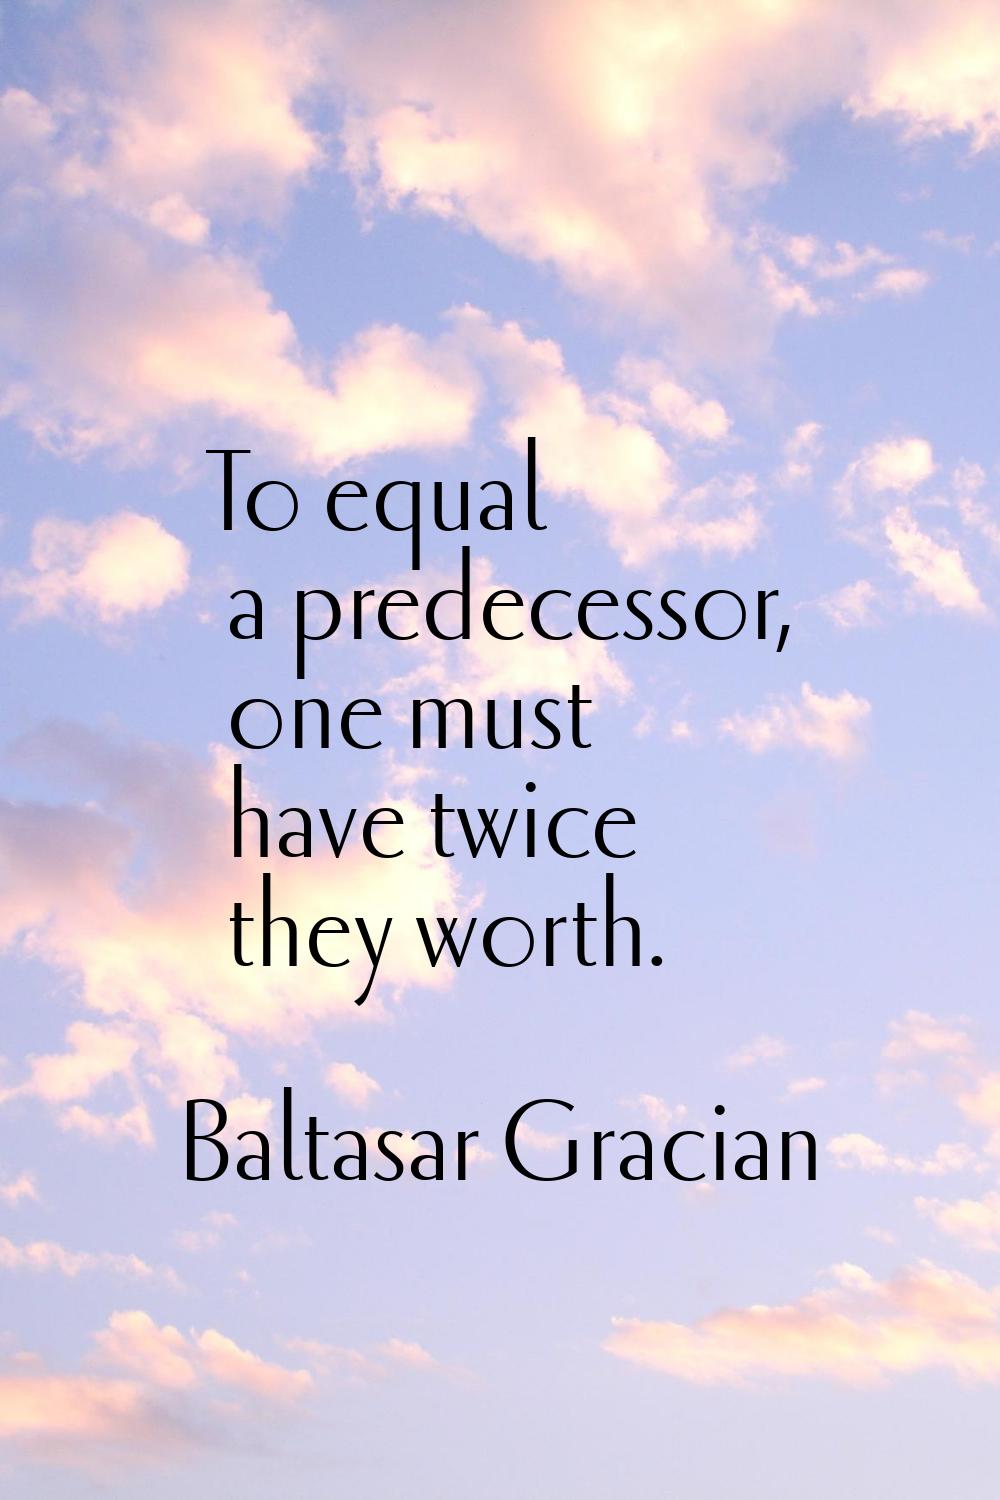 To equal a predecessor, one must have twice they worth.